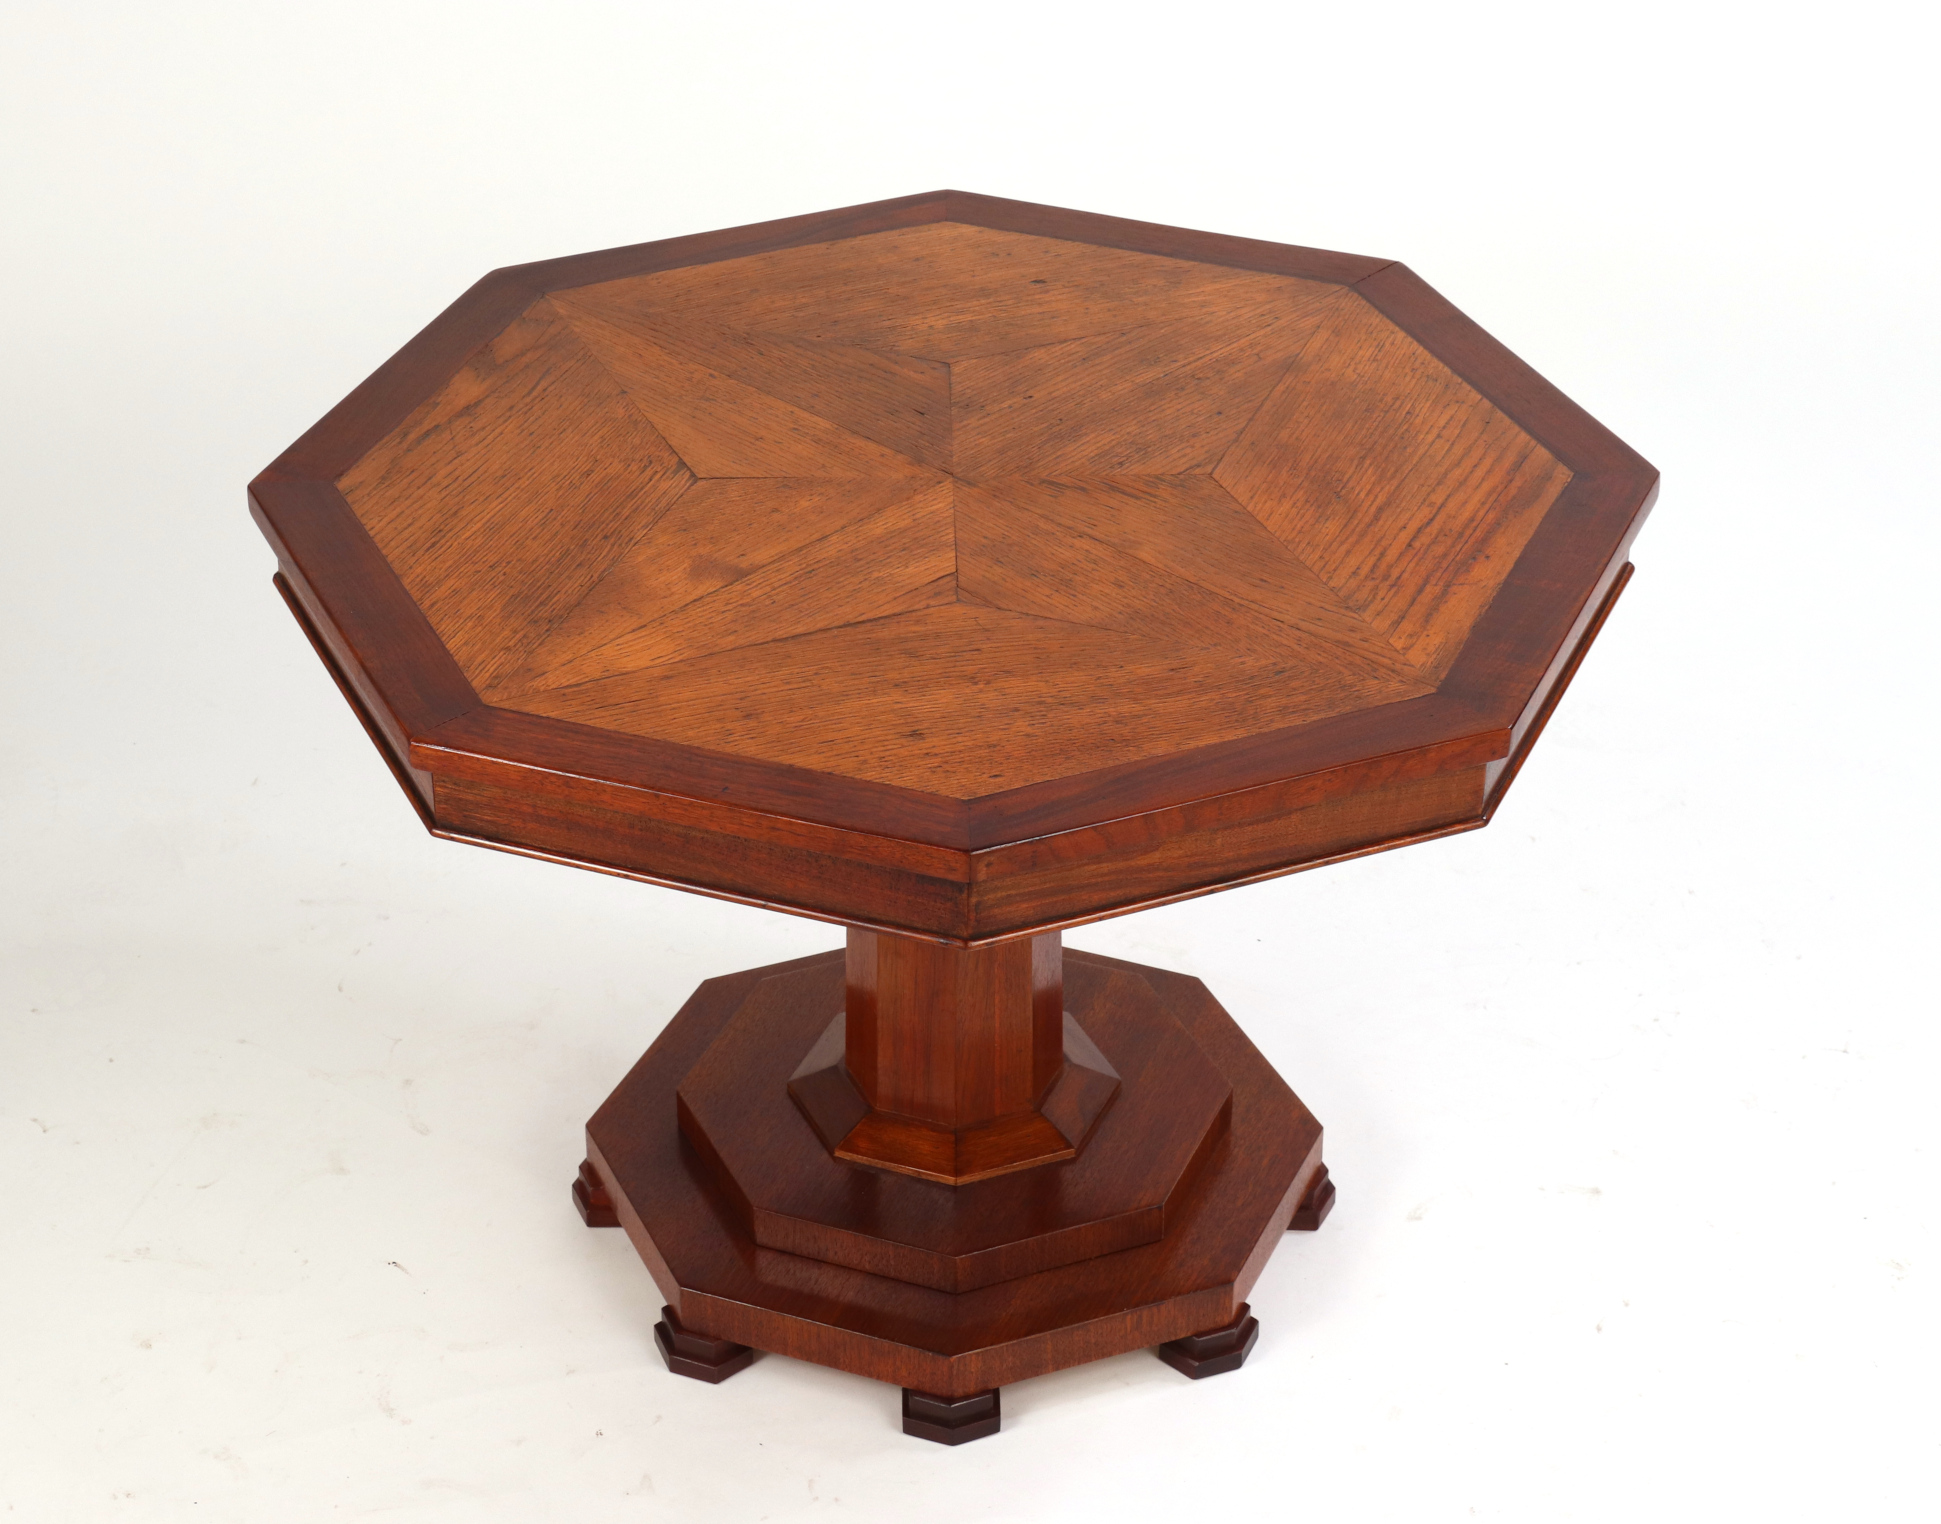 Oak Floor Panel Mounted as a Coffee Table, 19th c.